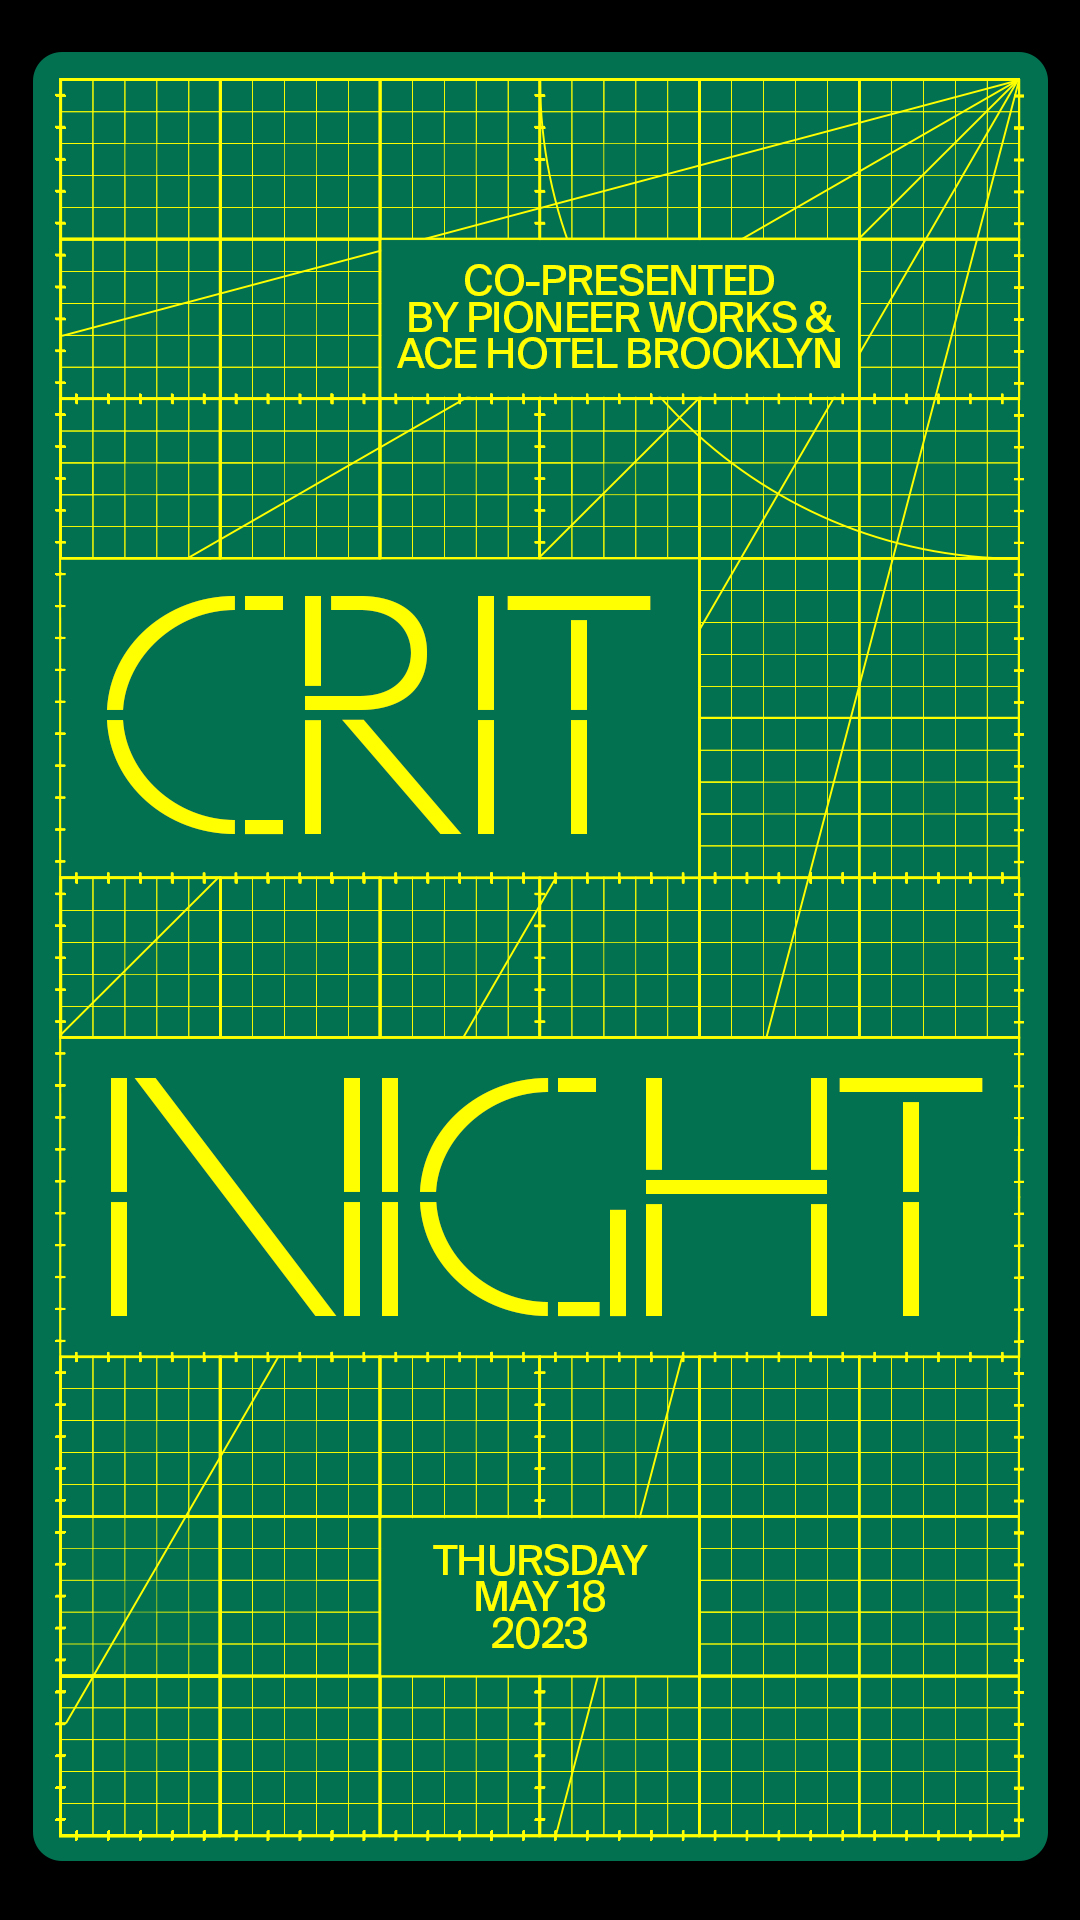 Crit Night Flyer for event at Ace Brooklyn